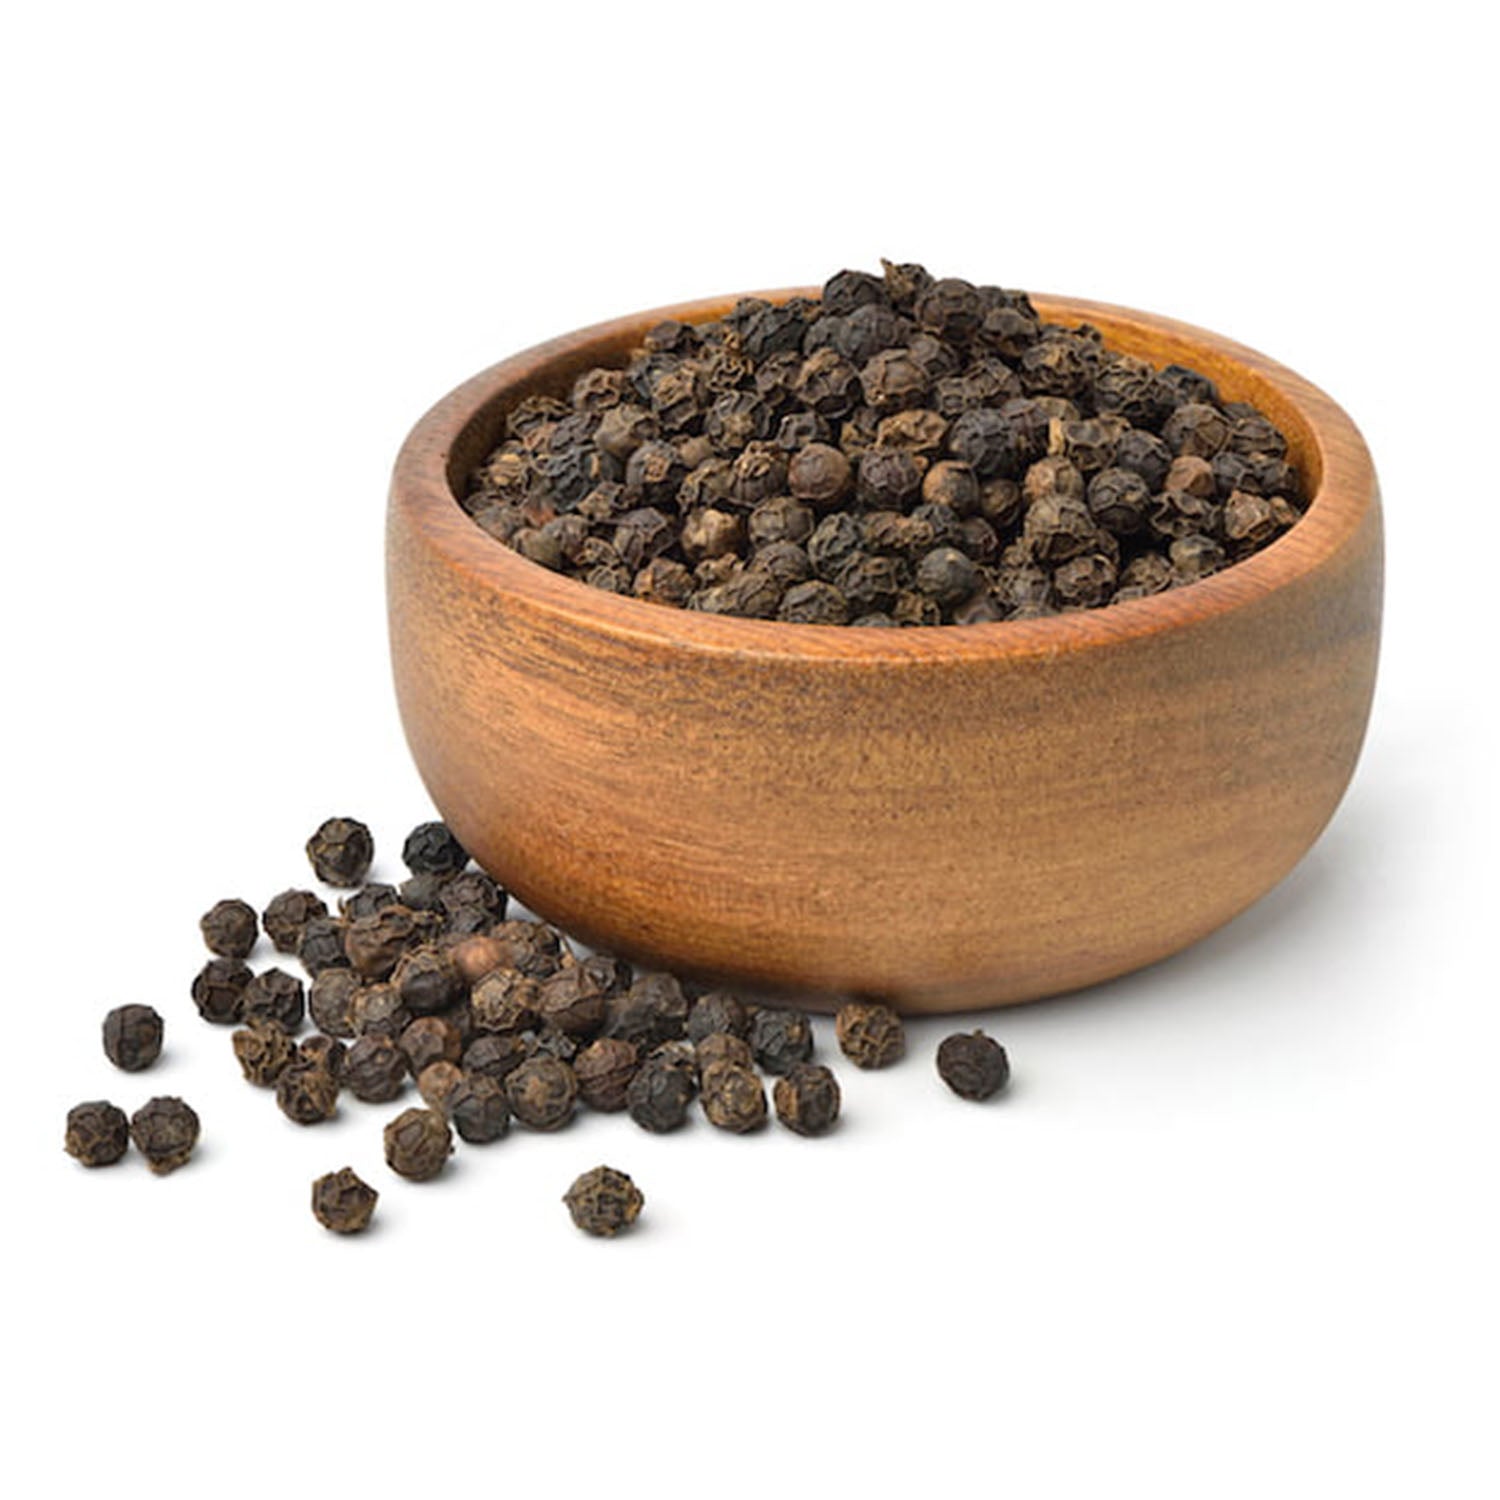 Milletamma’s Black Pepper Corns have Vitamin C, Vitamin A, Flavonoids, Carotenes and Antioxidants that help to protect the body from cancer and other diseases.  It works as an antibiotic that helps to cure cold and cough  It increases metabolism that helps to lose weight.